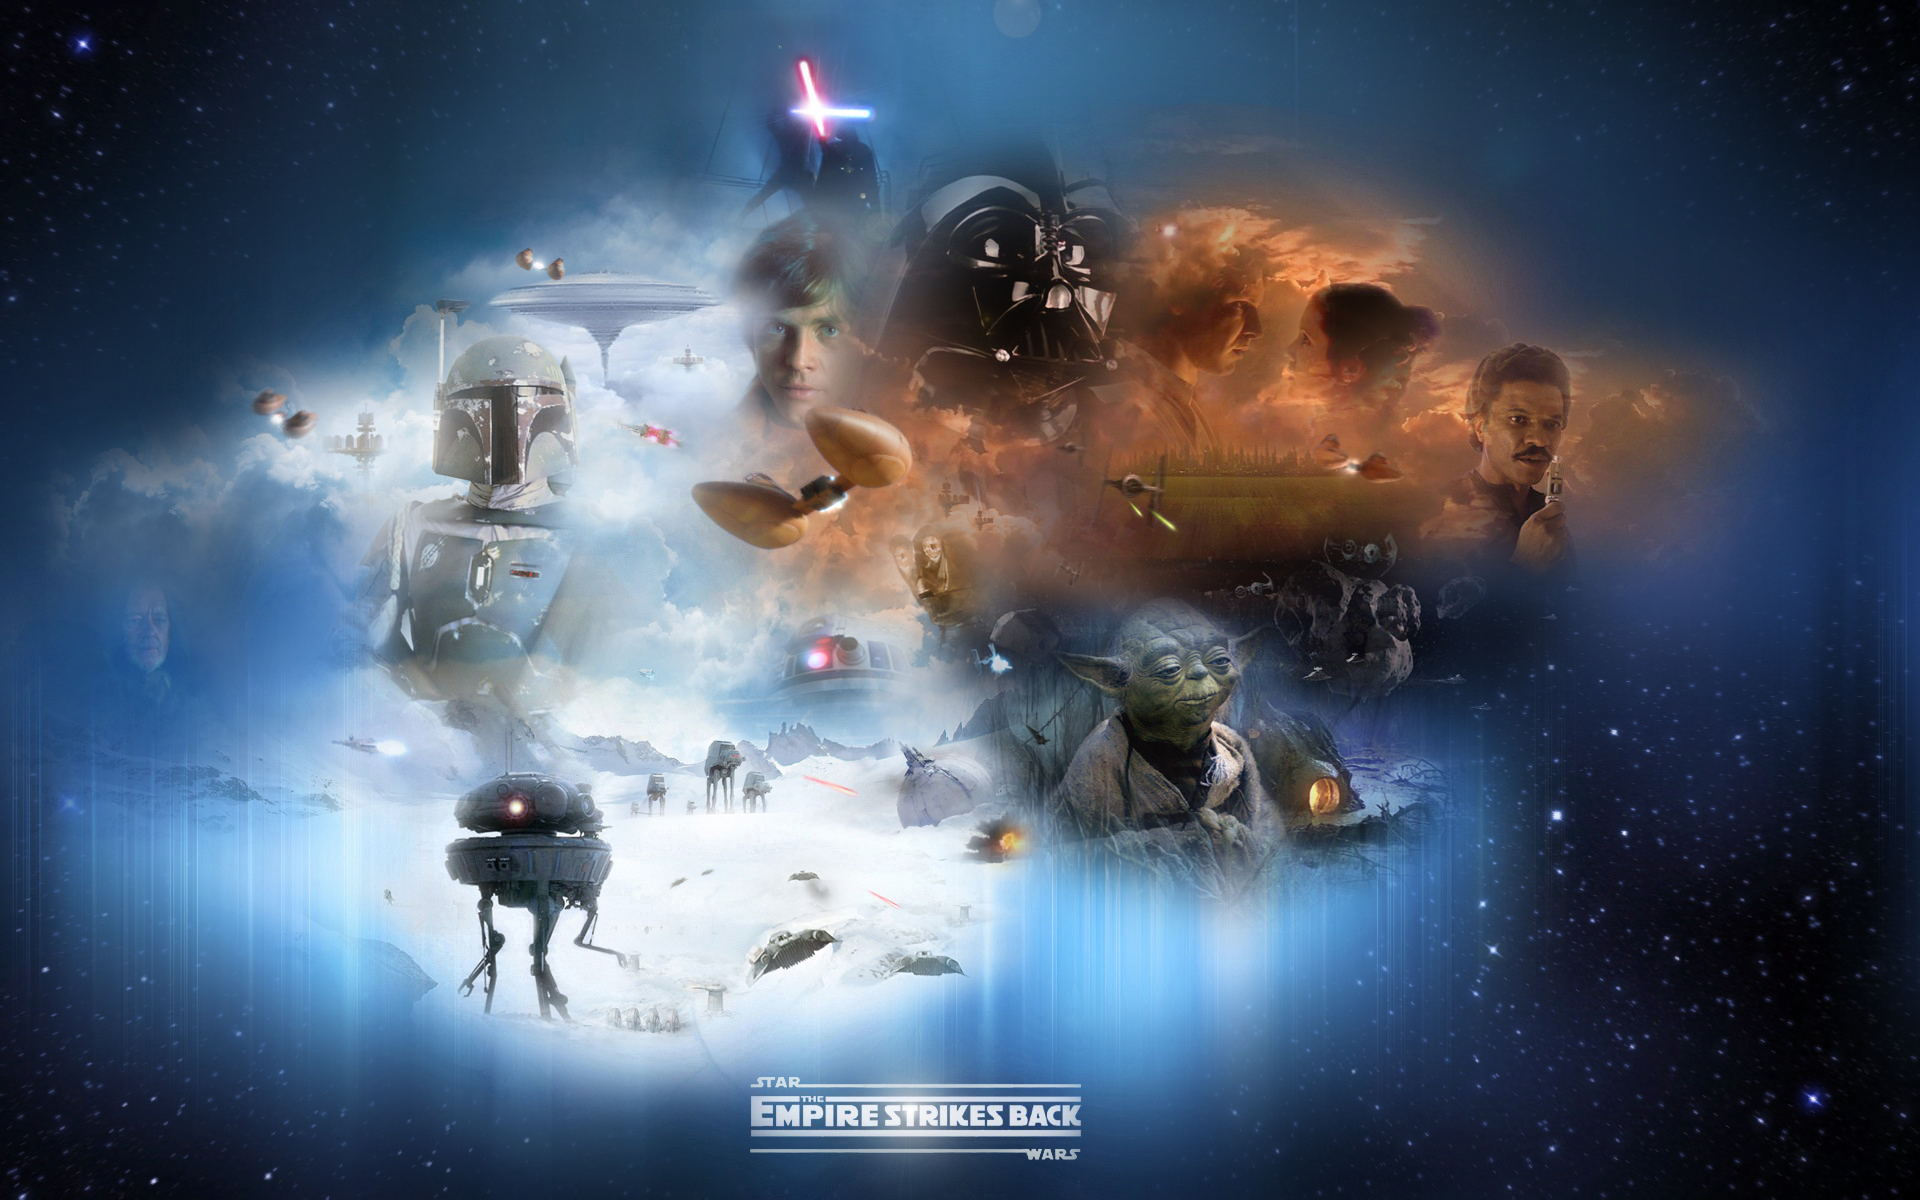 The Empire Strikes Back Final by 1darthvader on